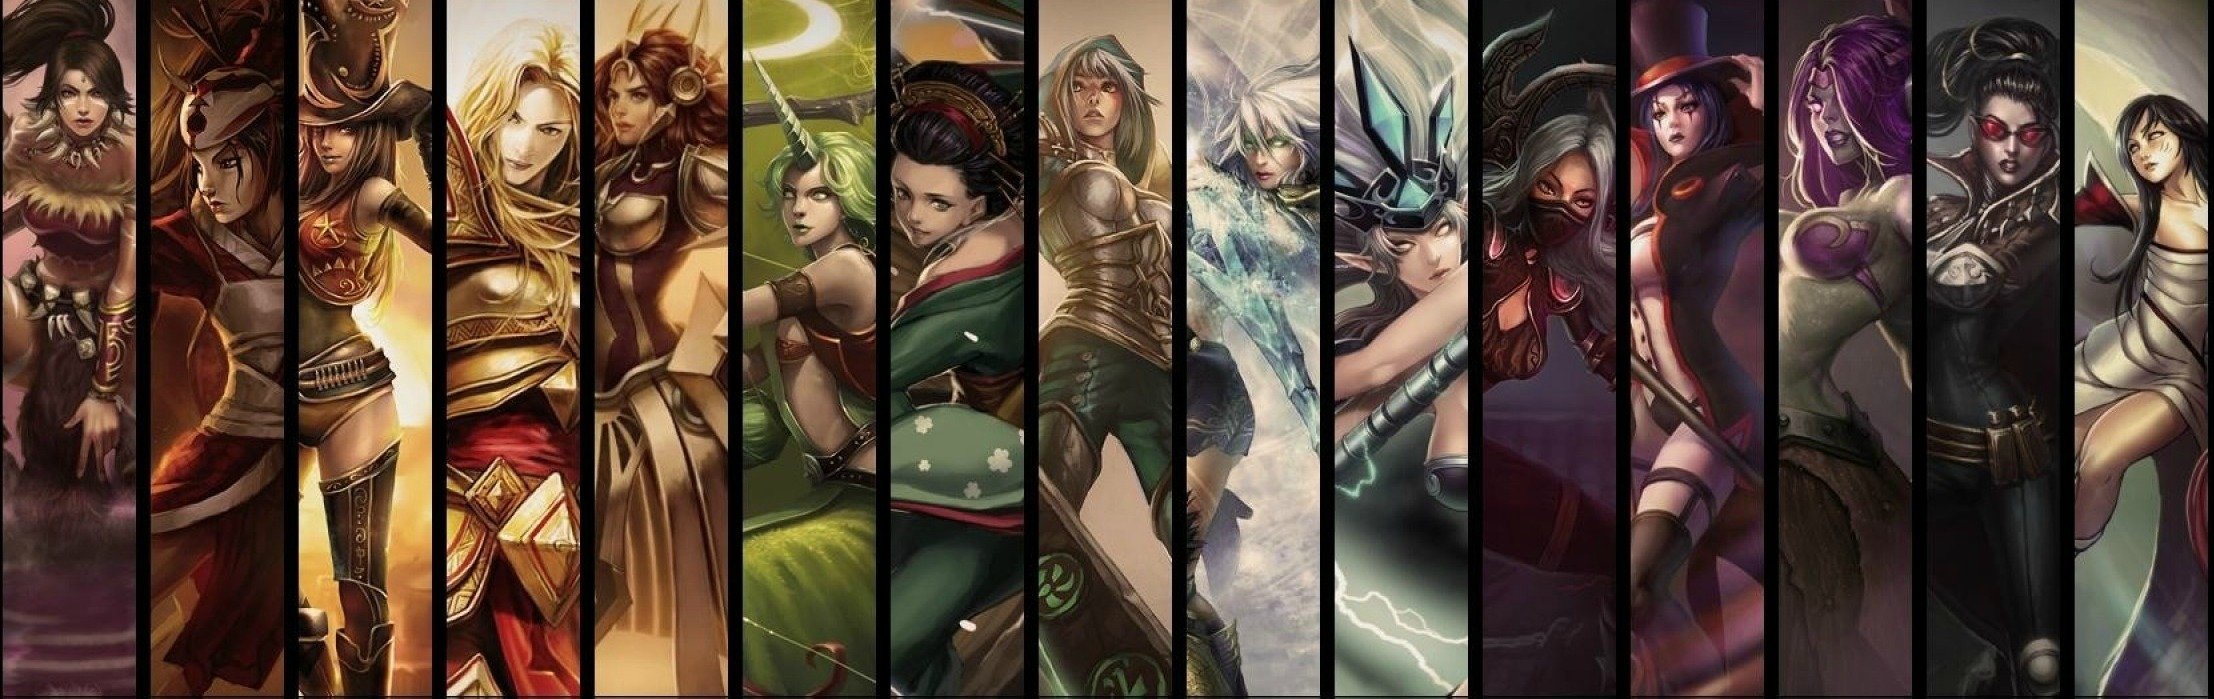 League of Legends Female Characters